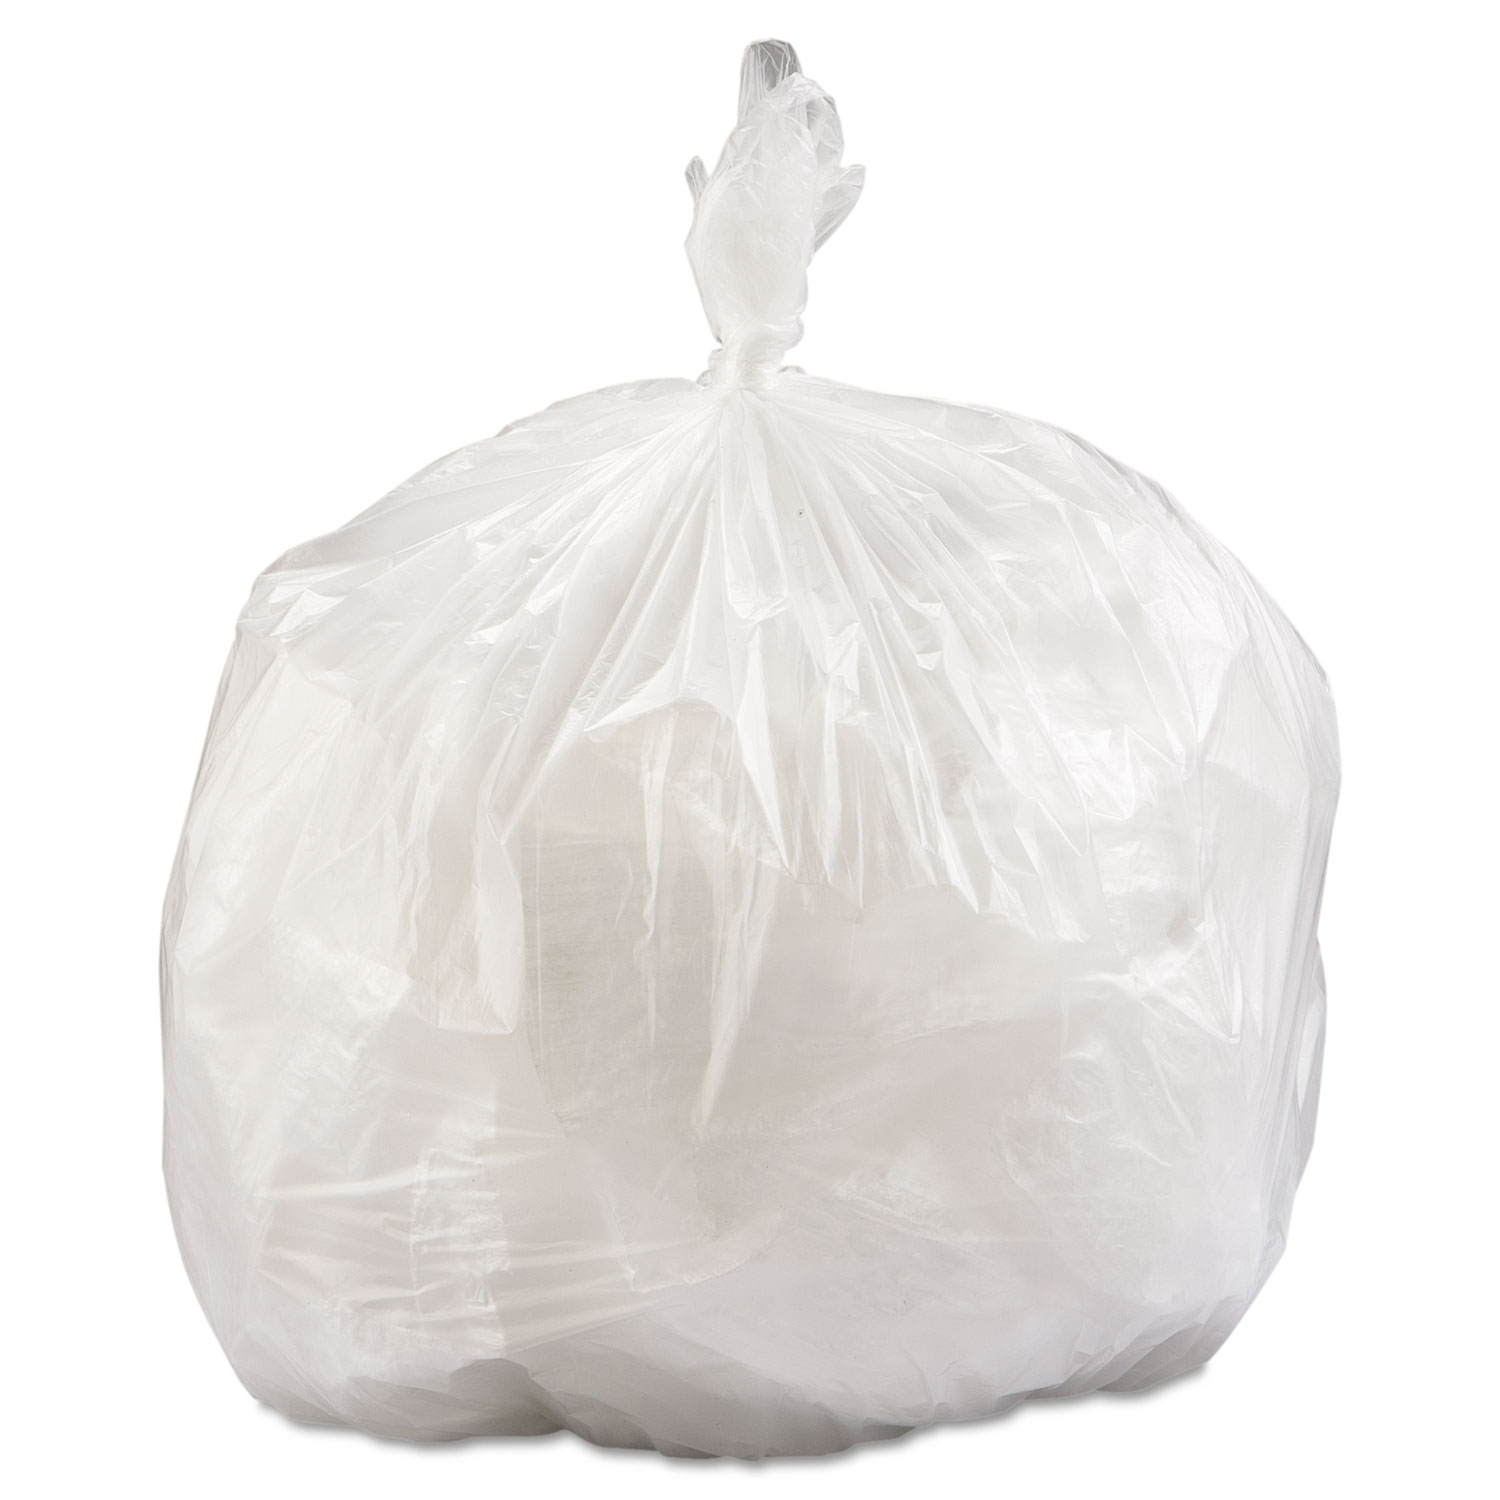 Inteplast Group High-Density Can Liner 33 x 39 33gal 16mic Clear 25/Roll 10 